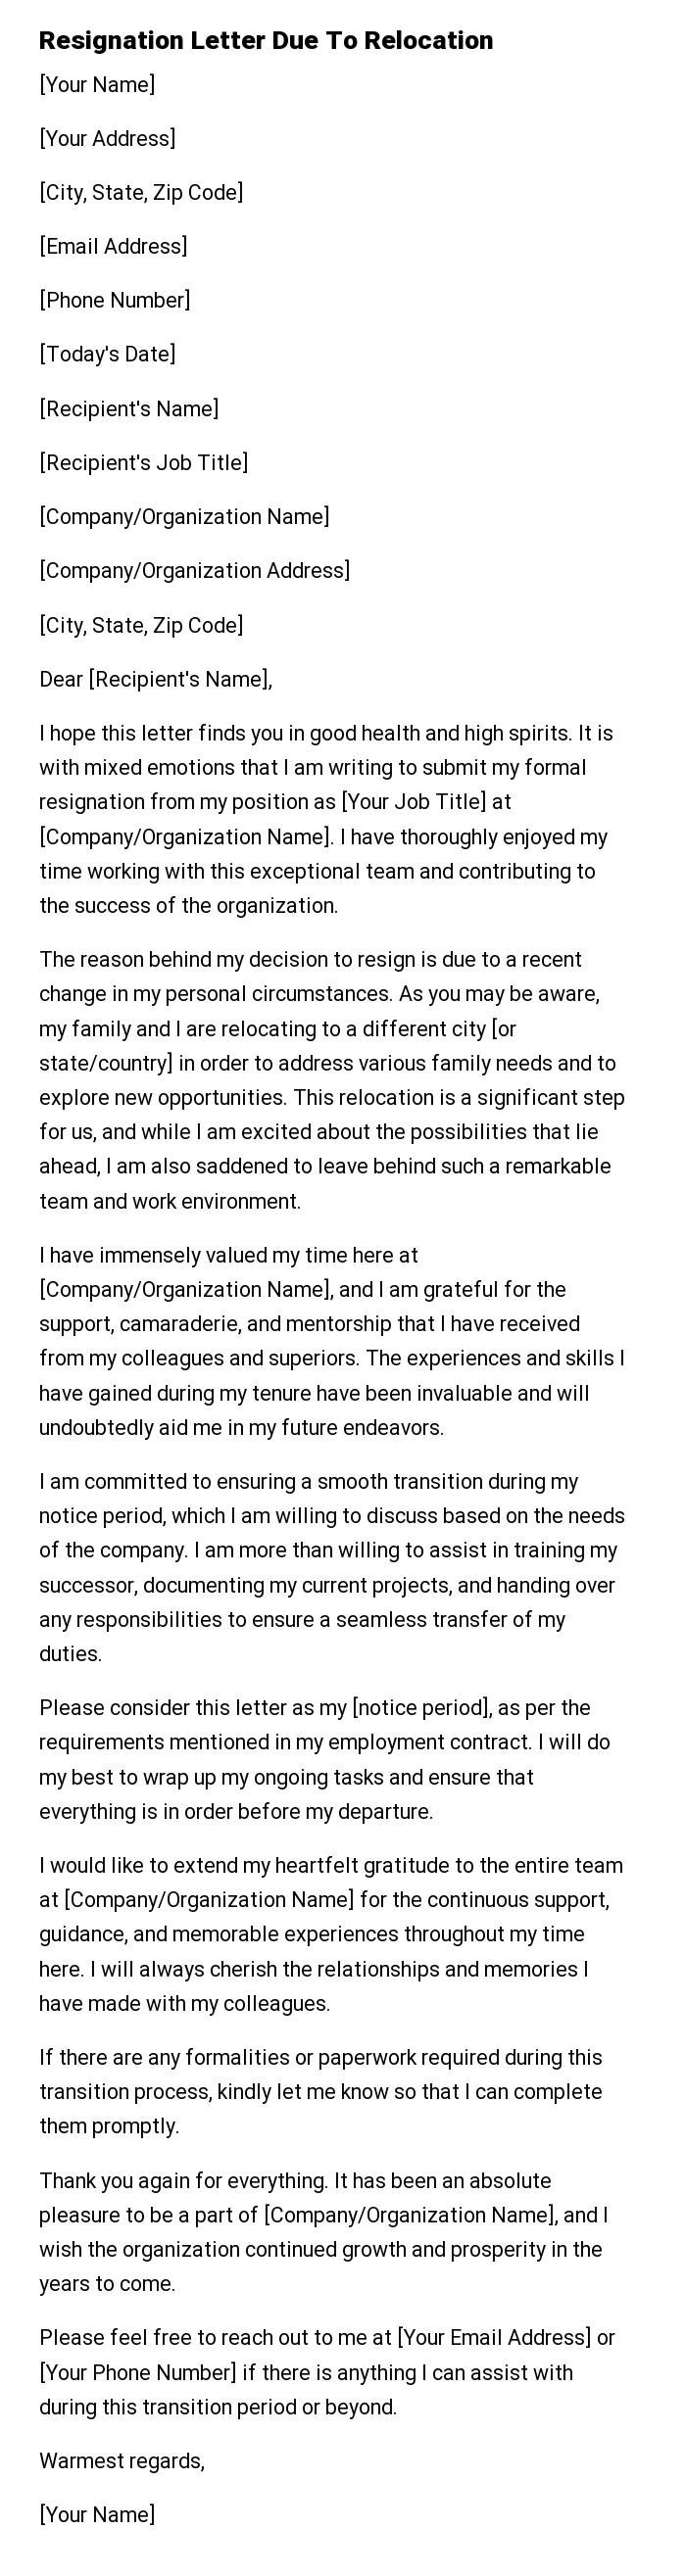 Resignation Letter Due To Relocation